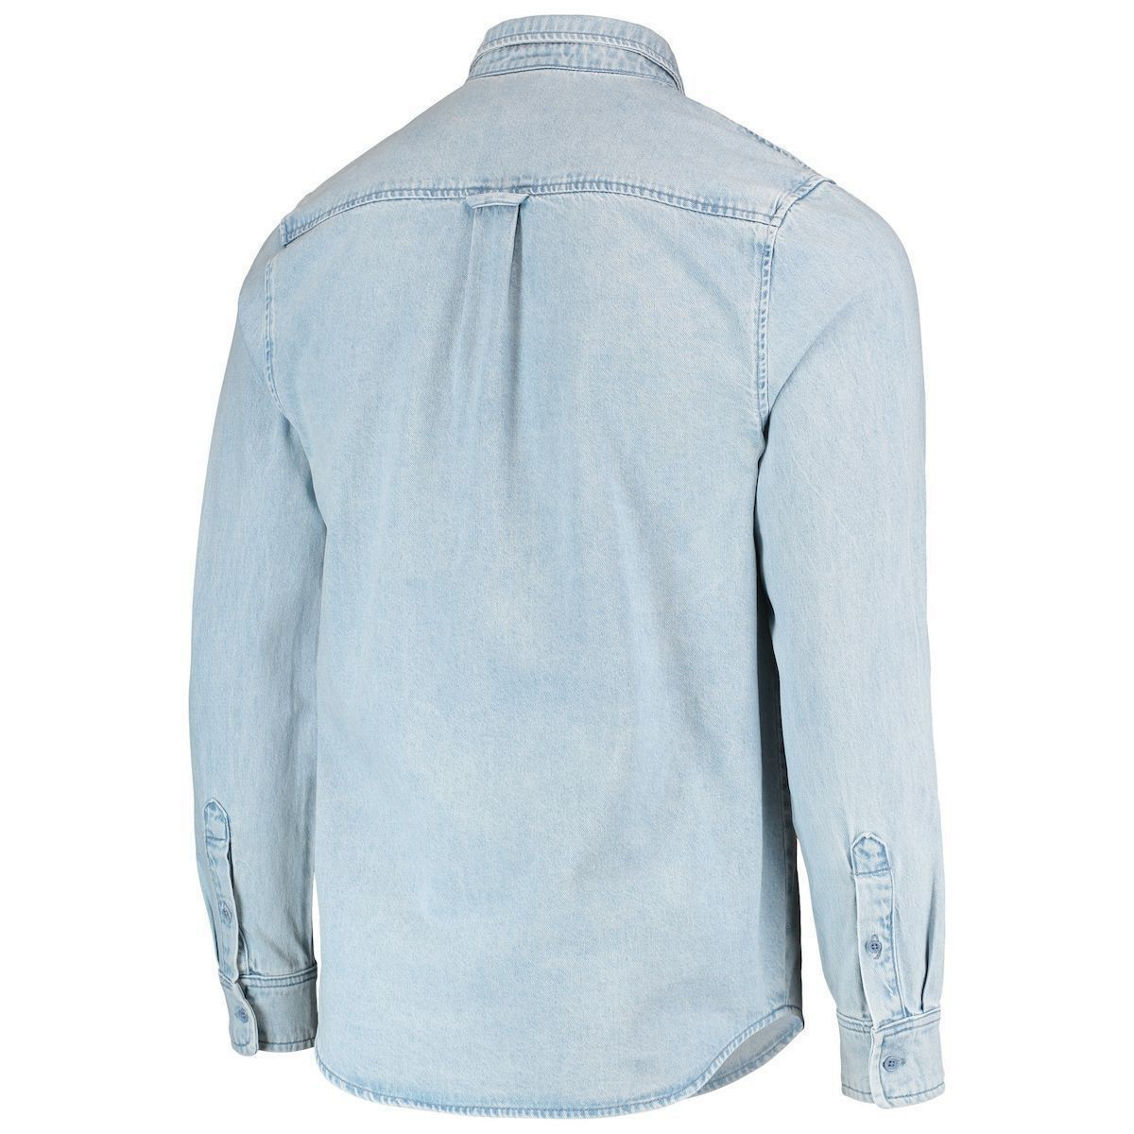 The Wild Collective Men's Blue LAFC Denim Button-Down Long Sleeve Shirt - Image 4 of 4